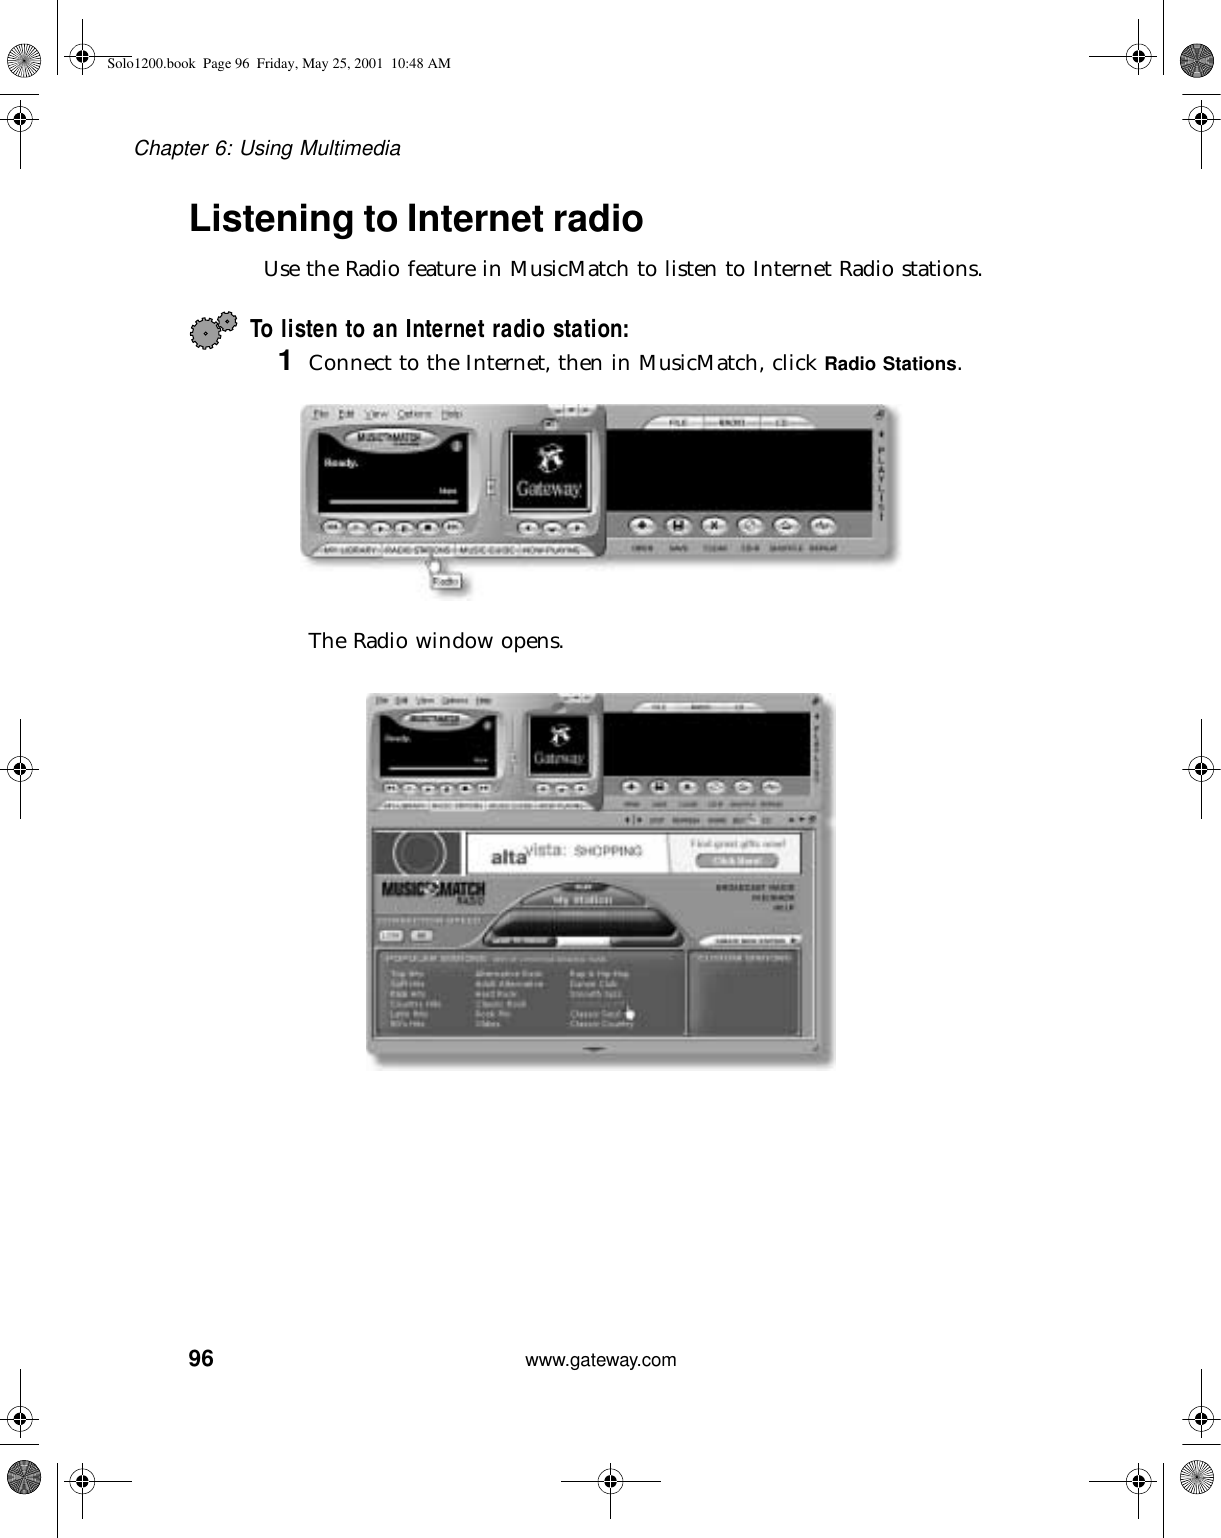 96Chapter 6: Using Multimediawww.gateway.comListening to Internet radio Use the Radio feature in MusicMatch to listen to Internet Radio stations.To listen to an Internet radio station:1Connect to the Internet, then in MusicMatch, click Radio Stations.The Radio window opens.Solo1200.book Page 96 Friday, May 25, 2001 10:48 AM